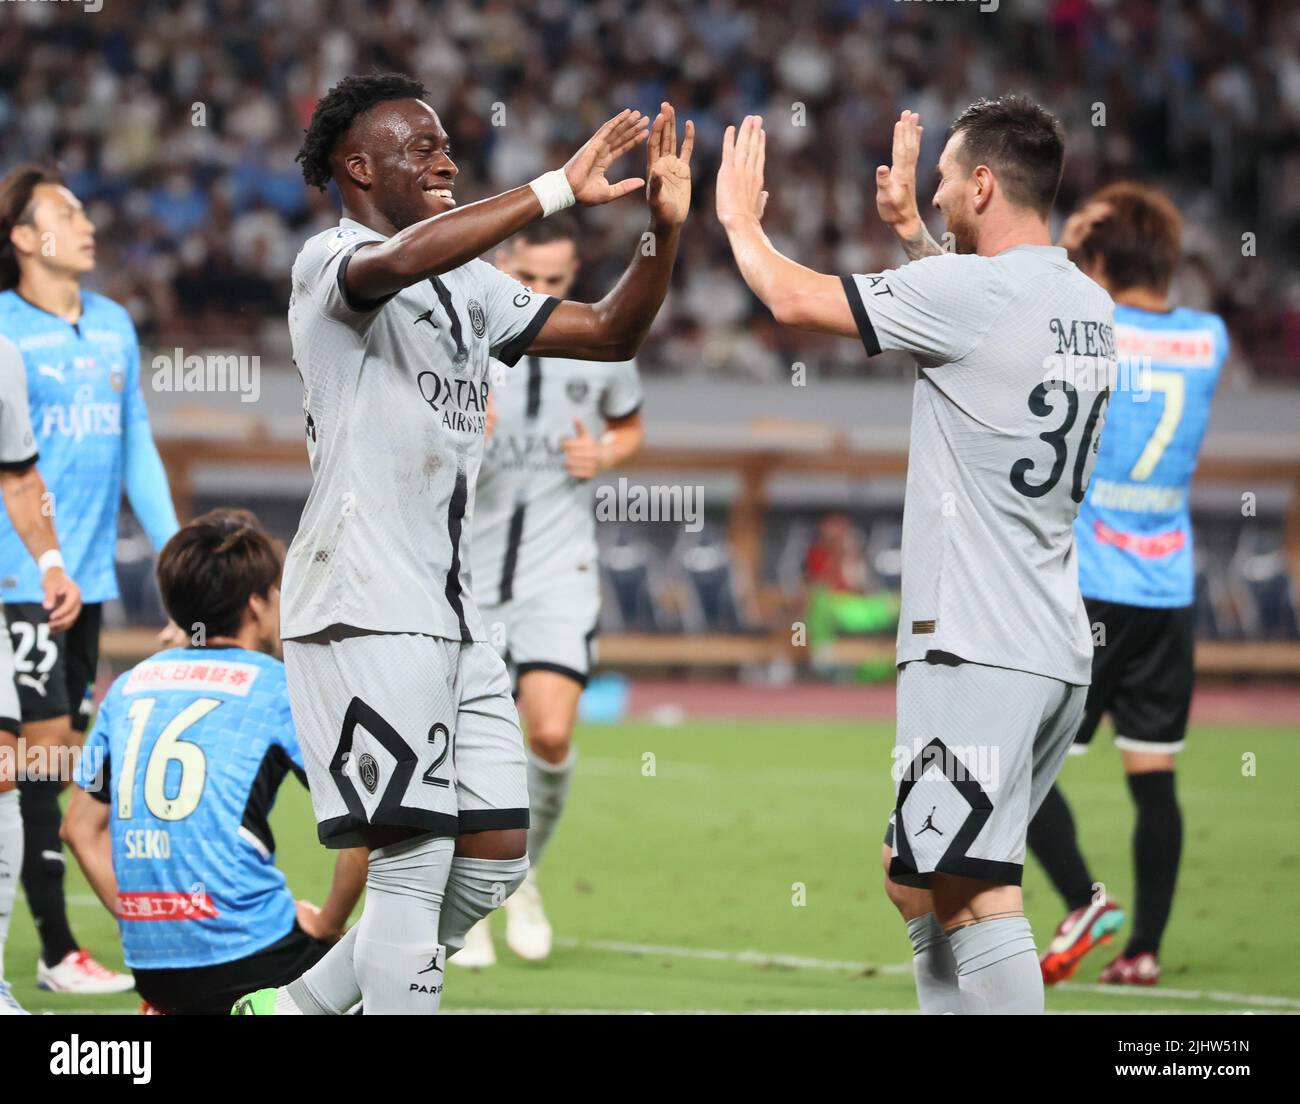 Tokyo, Japan. 20th July, 2022. French football club team Paris Saint-Germain forward Arnaud Kalimuendo (L) is celebrated by Lionel Messi as Messi assisted Kalimuendo's goal during an international friendly match against Japan's Kawasaki Frontale at the national stadium in Tokyo on Wednesday, July 20, 2022. Paris Saint-Germain defeated Kawasaki Frontale 2-1 at the firts game of their Japan tour. Credit: Yoshio Tsunoda/AFLO/Alamy Live News Stock Photo